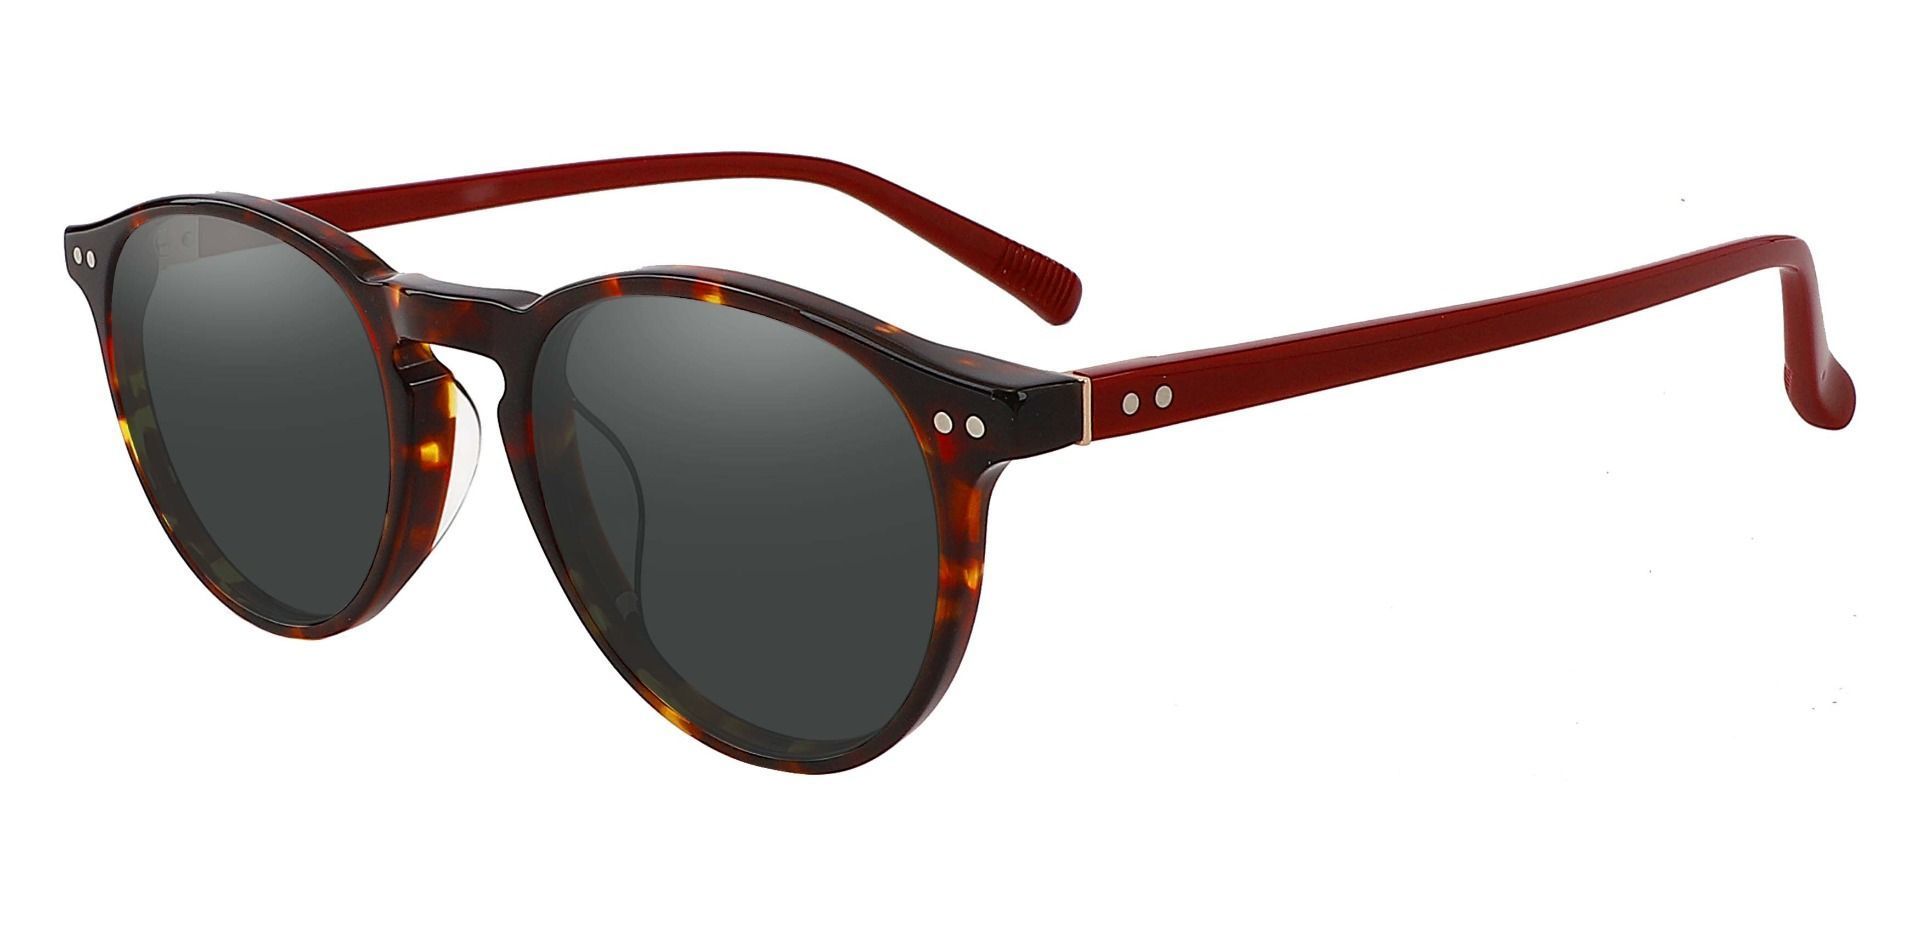 Monarch Oval Non-Rx Sunglasses - Tortoise Frame With Gray Lenses